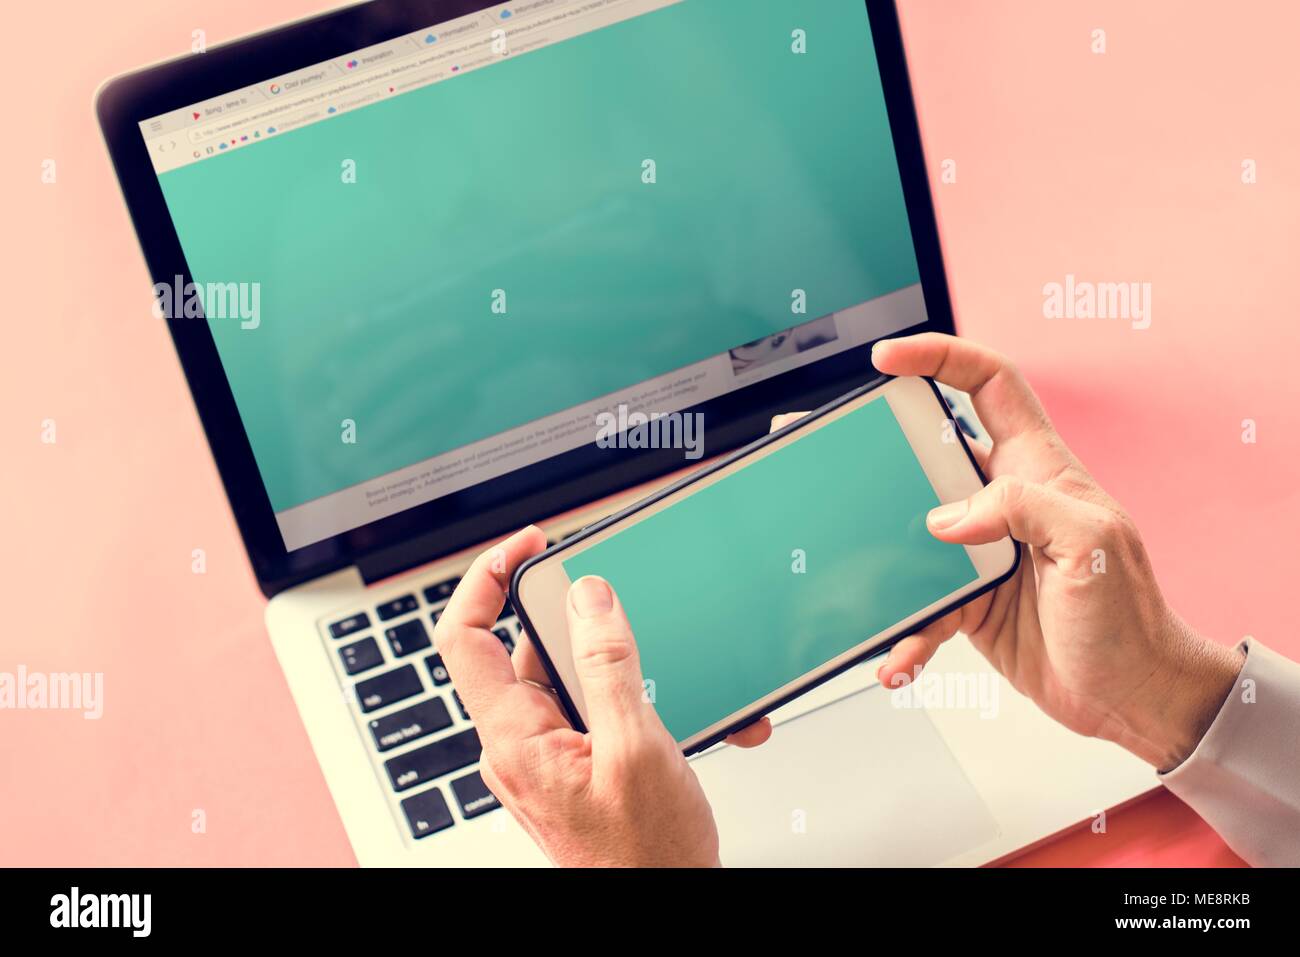 Hands holding smartphone and laptop in background Stock Photo